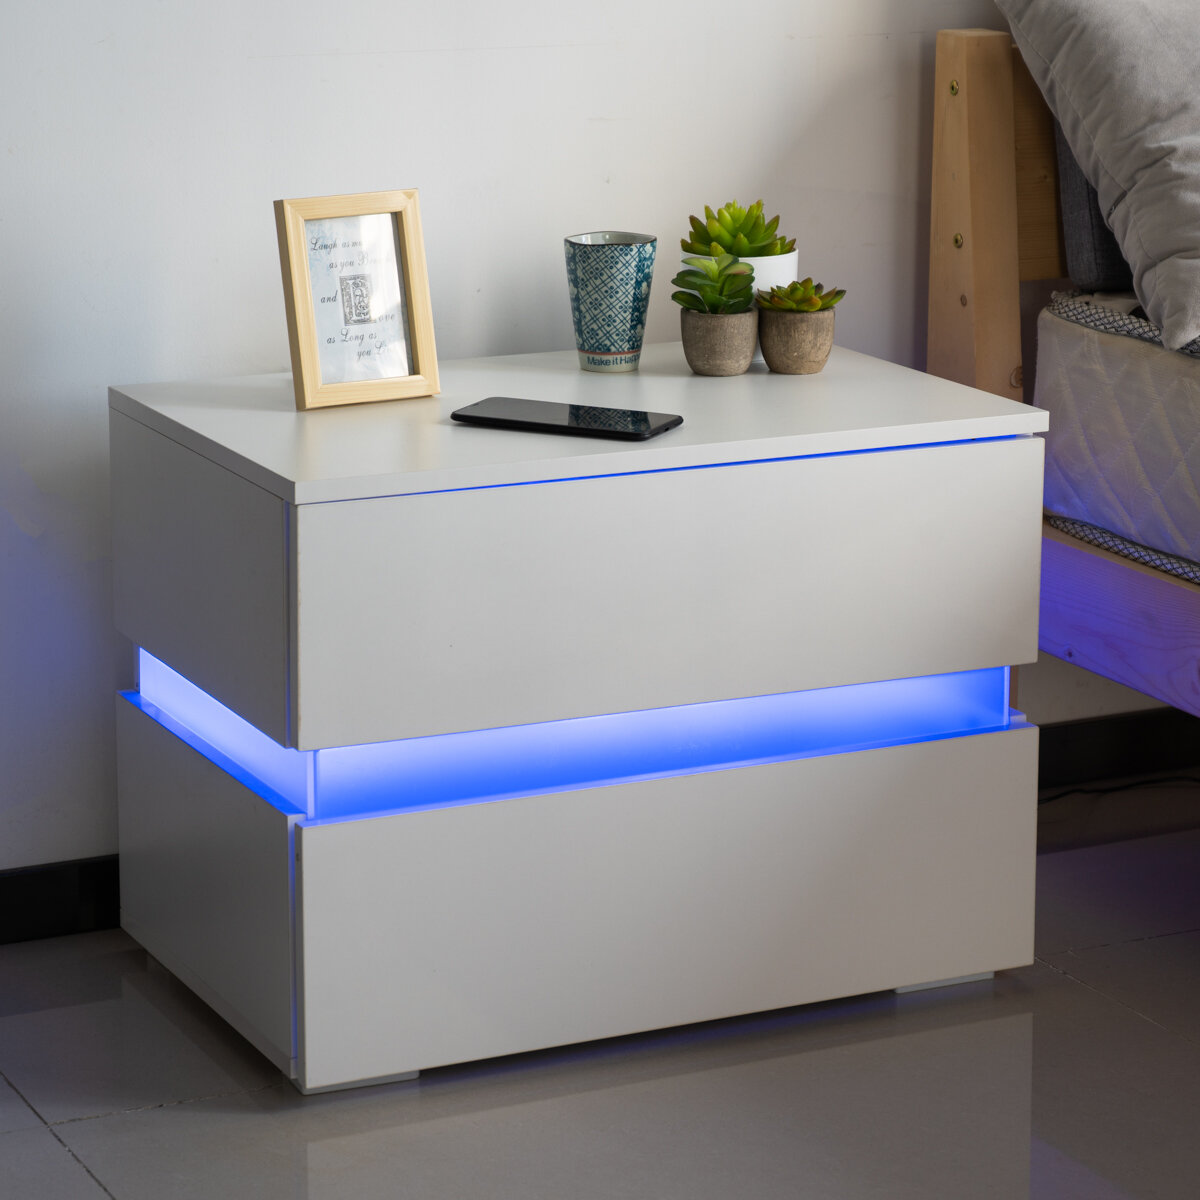 

Woodyhome 60*39*45cm High Gloss LED Light Nightstands w/2 Drawers Modern Bedside File Cabinet Holder Chest Table for Hom